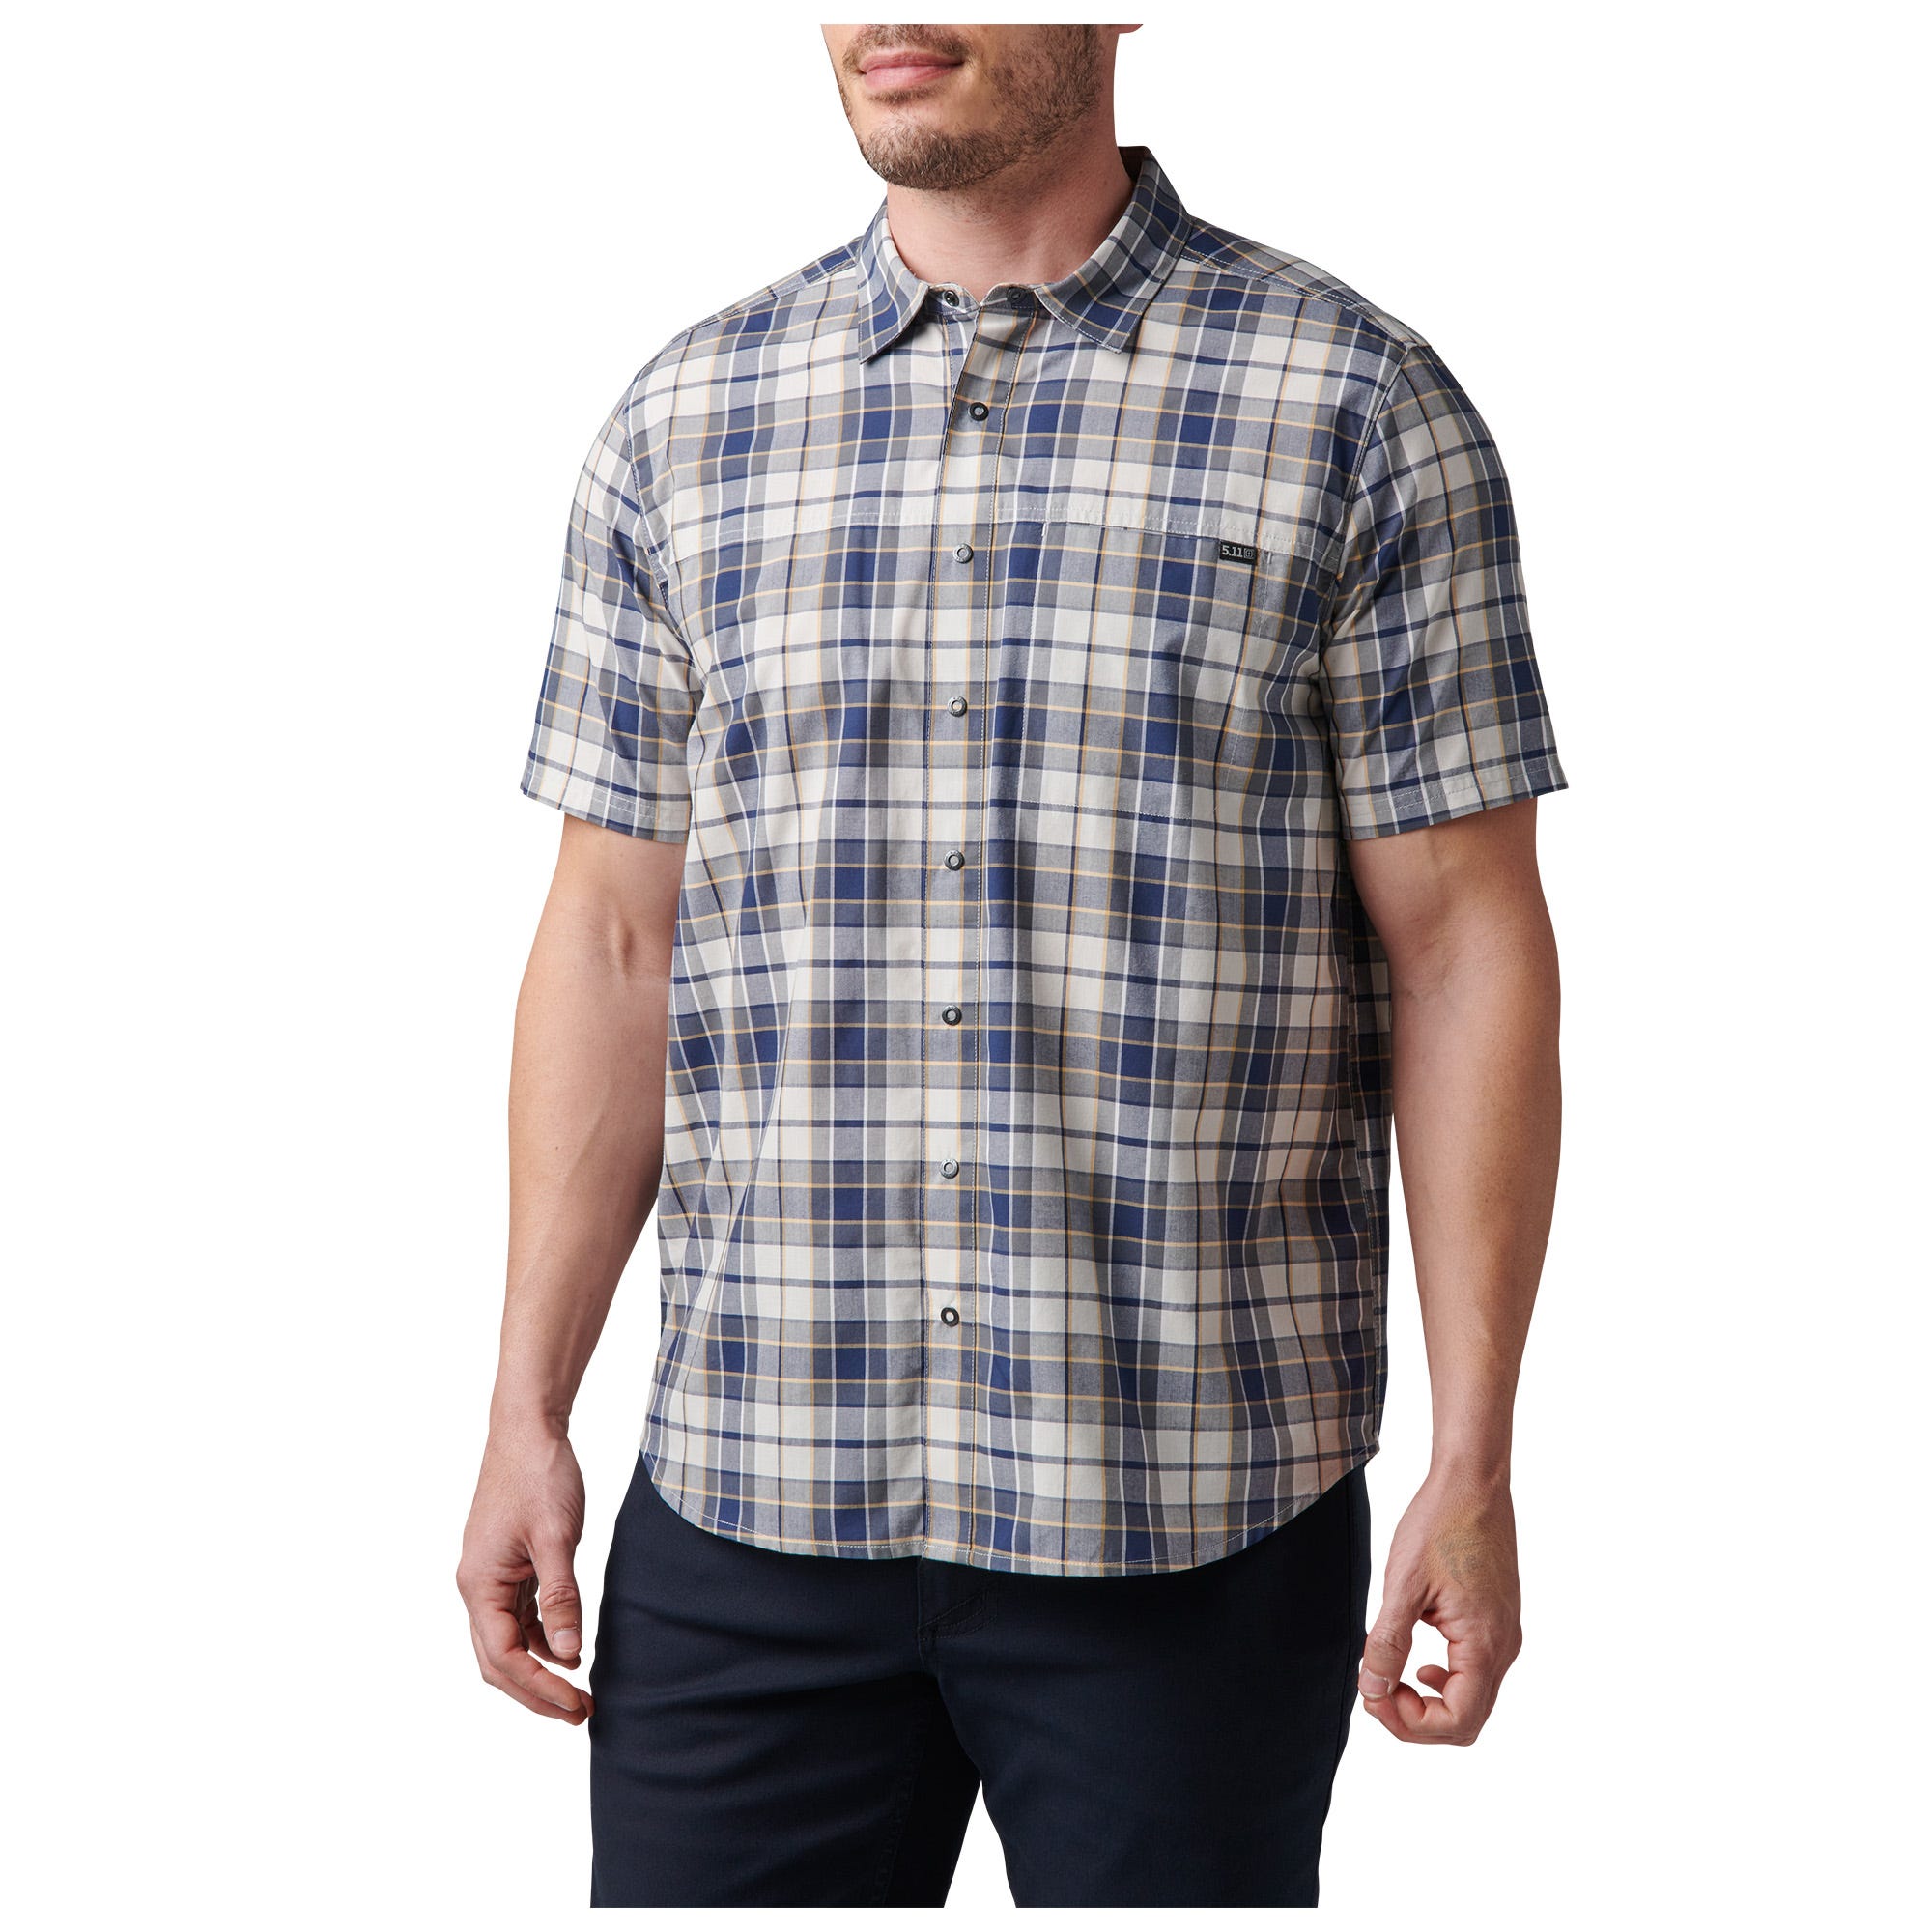 5.11 Tactical Men's Aerial Short Sleeve Casual Button-Down Shirt Style 71378 